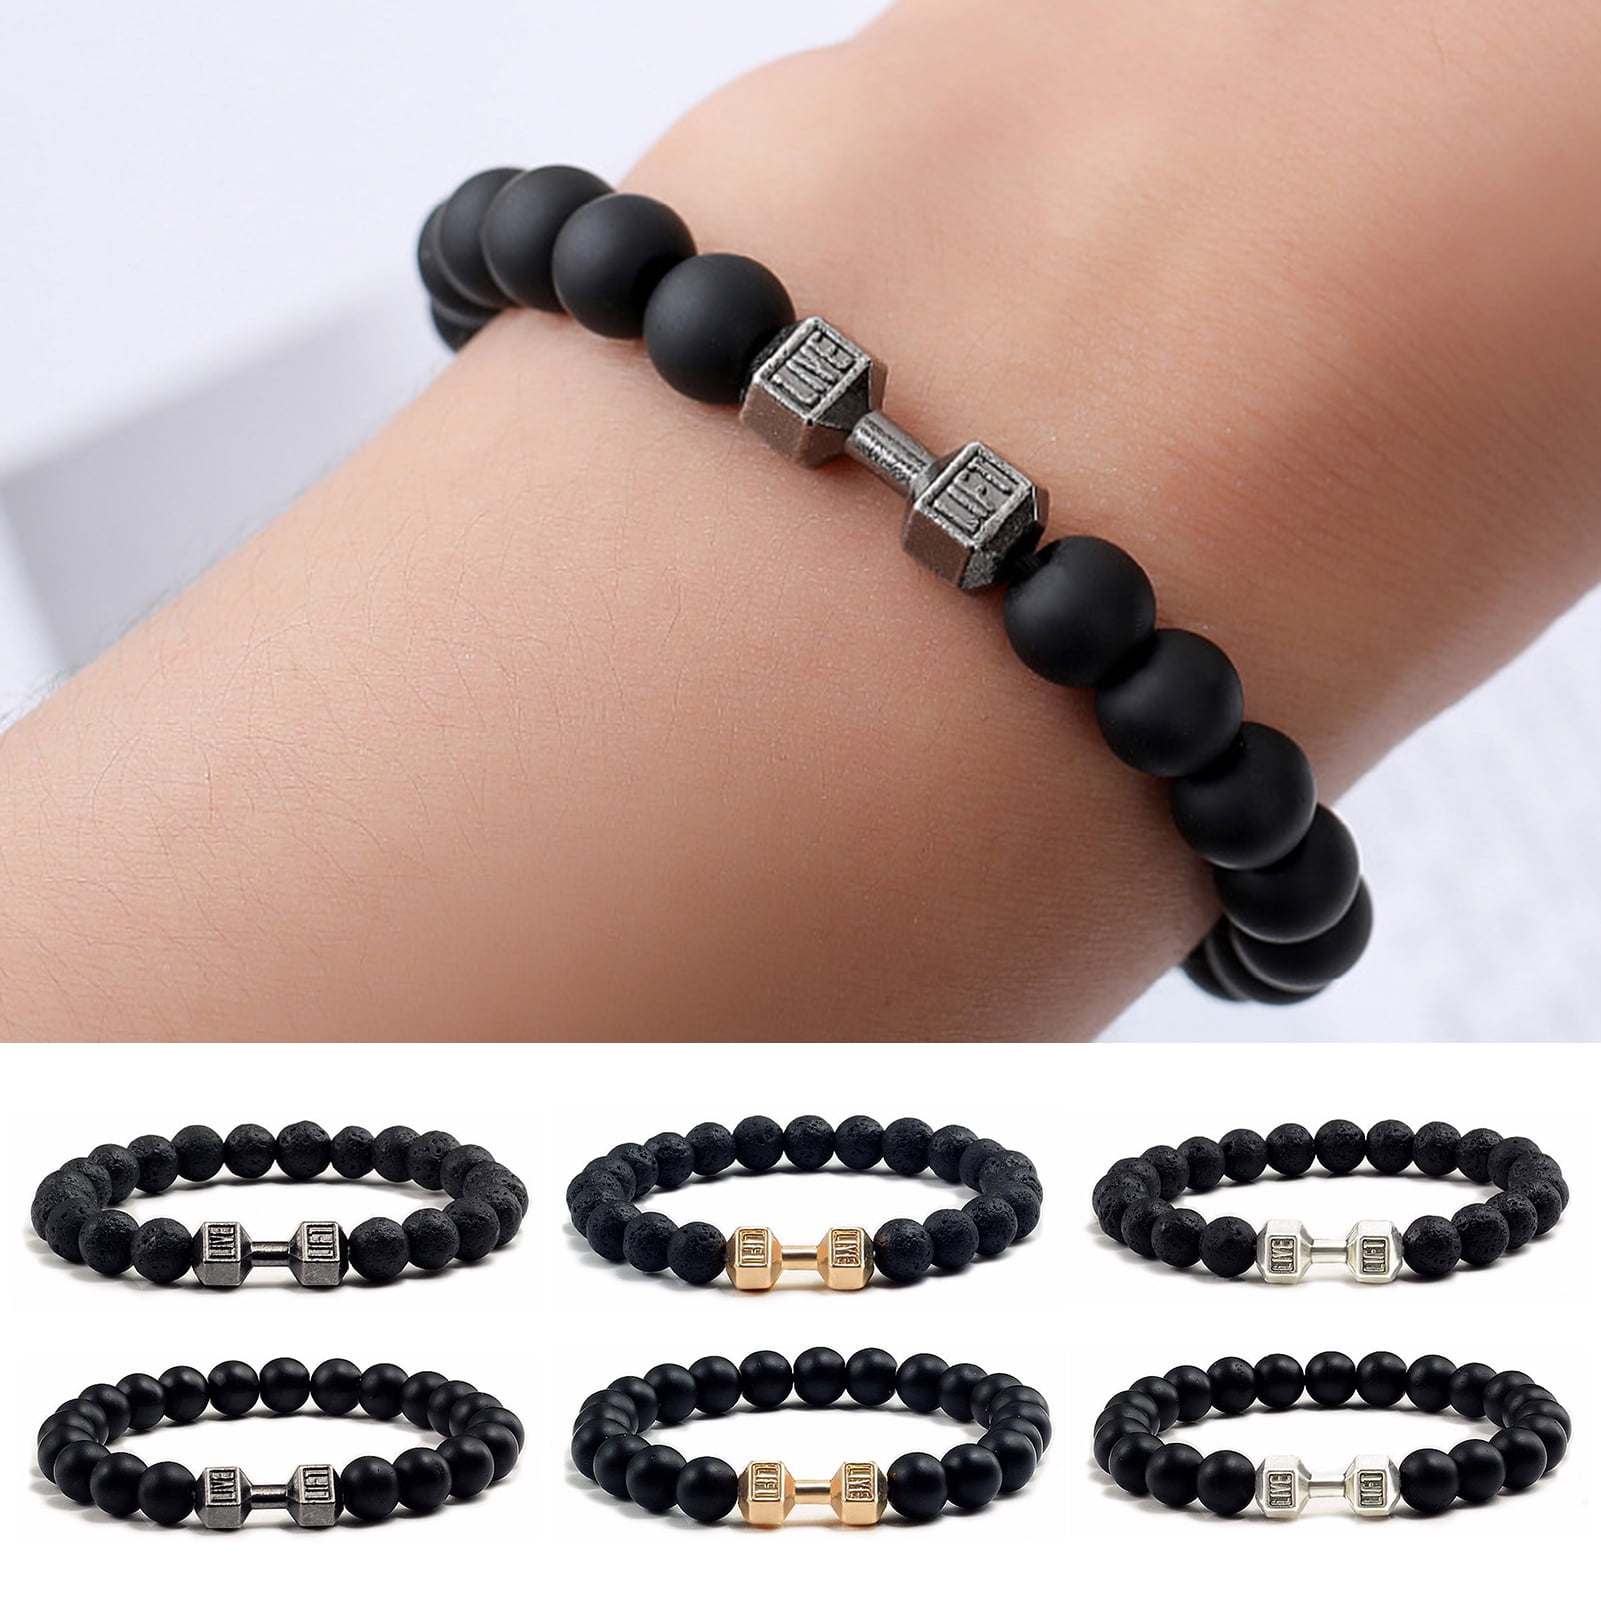 Live lift gym silver dumbbell weight bead stretch bracelet workout